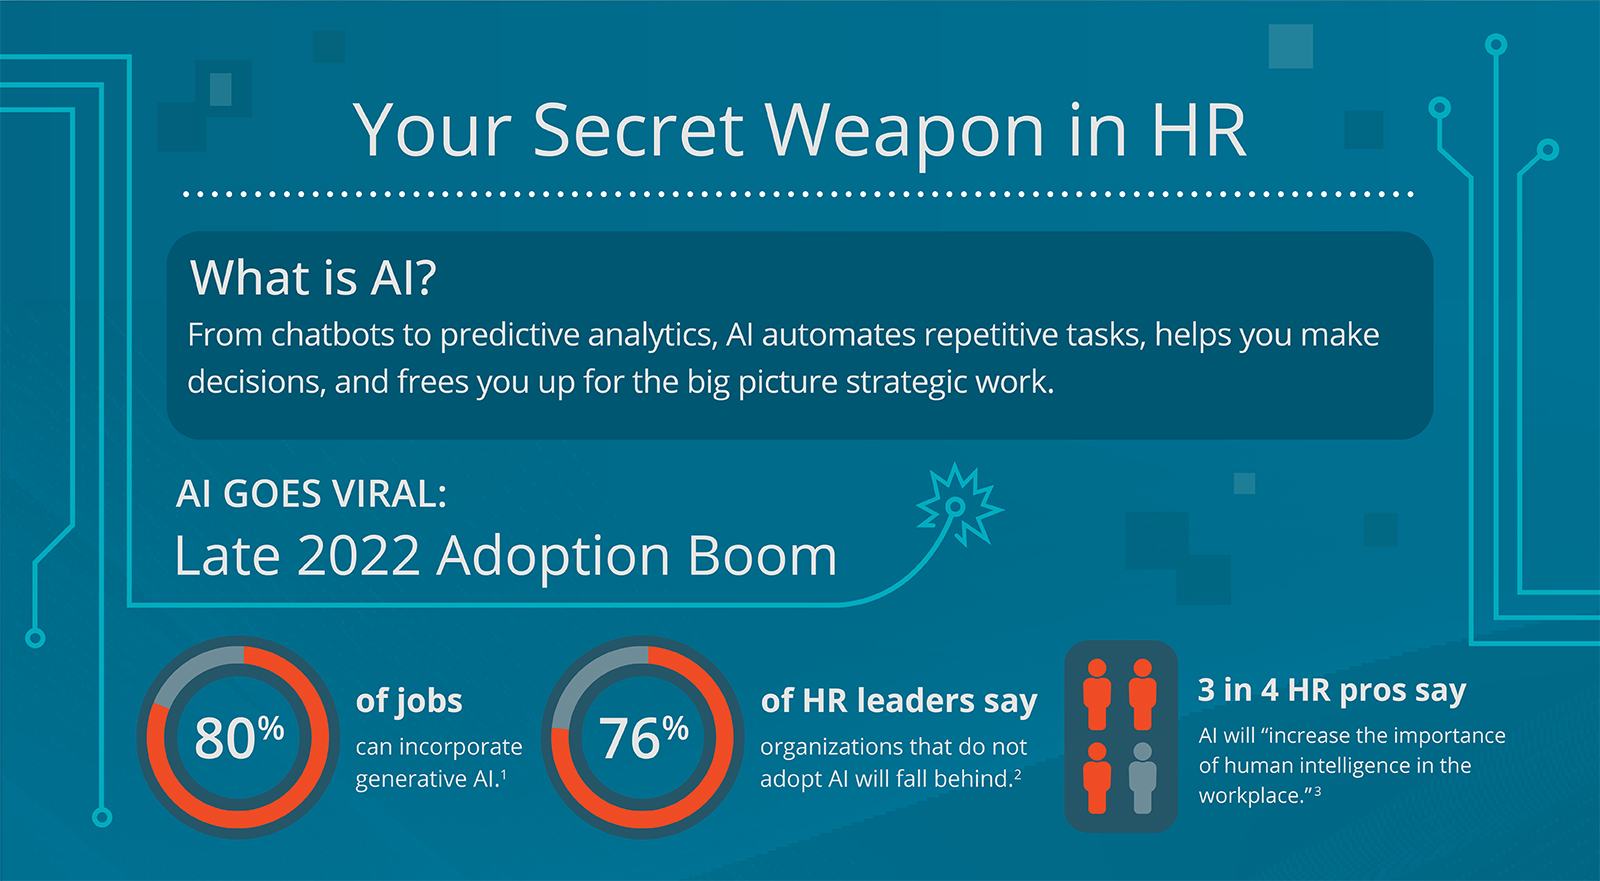 Your Secret Weapon in HR What is AI? From chatbots to predictive analytics, AI automates repetitive tasks, helps you make decisions, and frees you up for the big picture strategic work. AI Goes Viral: Late 2022 Adoption Boom 80% of jobs can incorporate generative AI 76% of HR leaders say organizations that do not adopt AI will fall behind 3 in 4 HR pros say AI will “increase the importance of human intelligence in the workplace.”